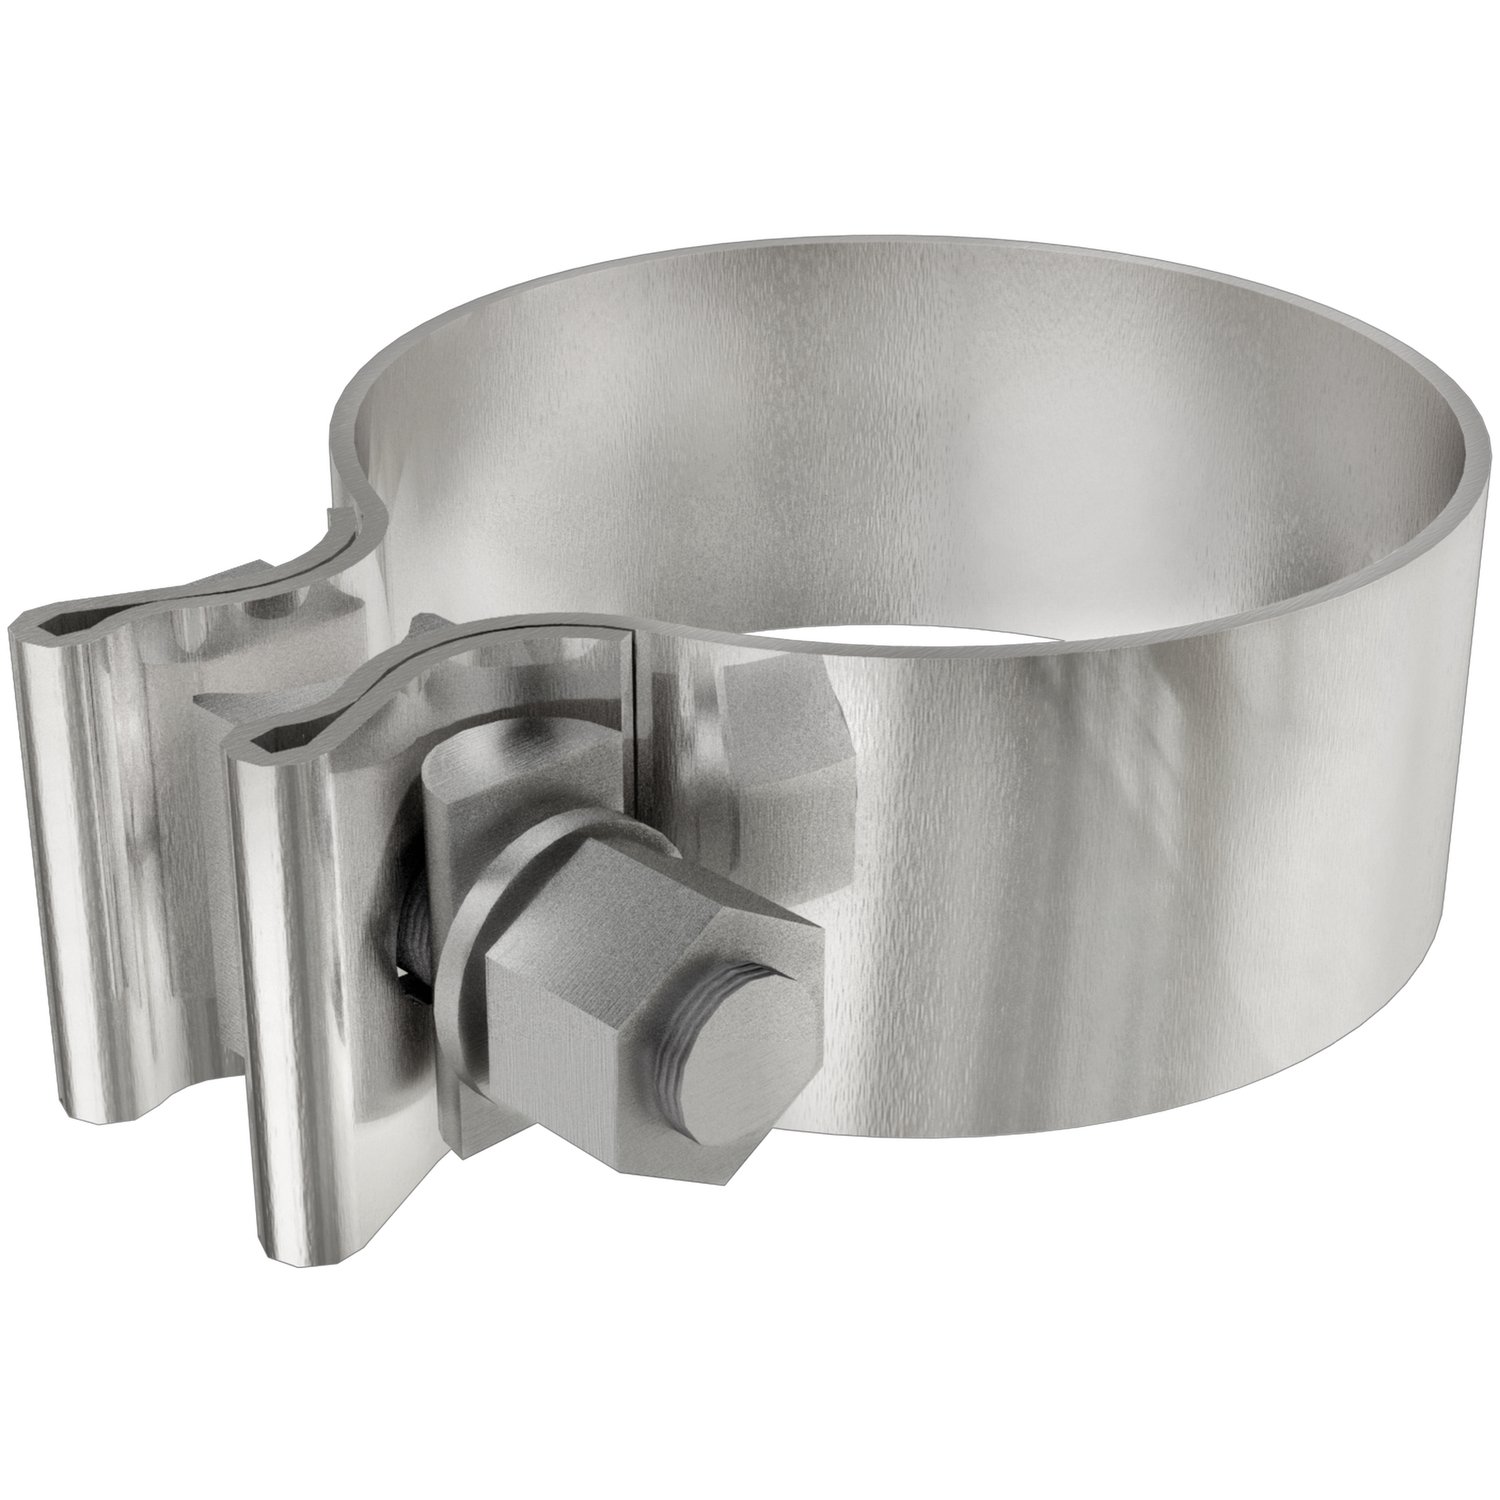 AccuSeal Stainless Steel Exhaust Band Clamps Clamp Diameter: 2.5"